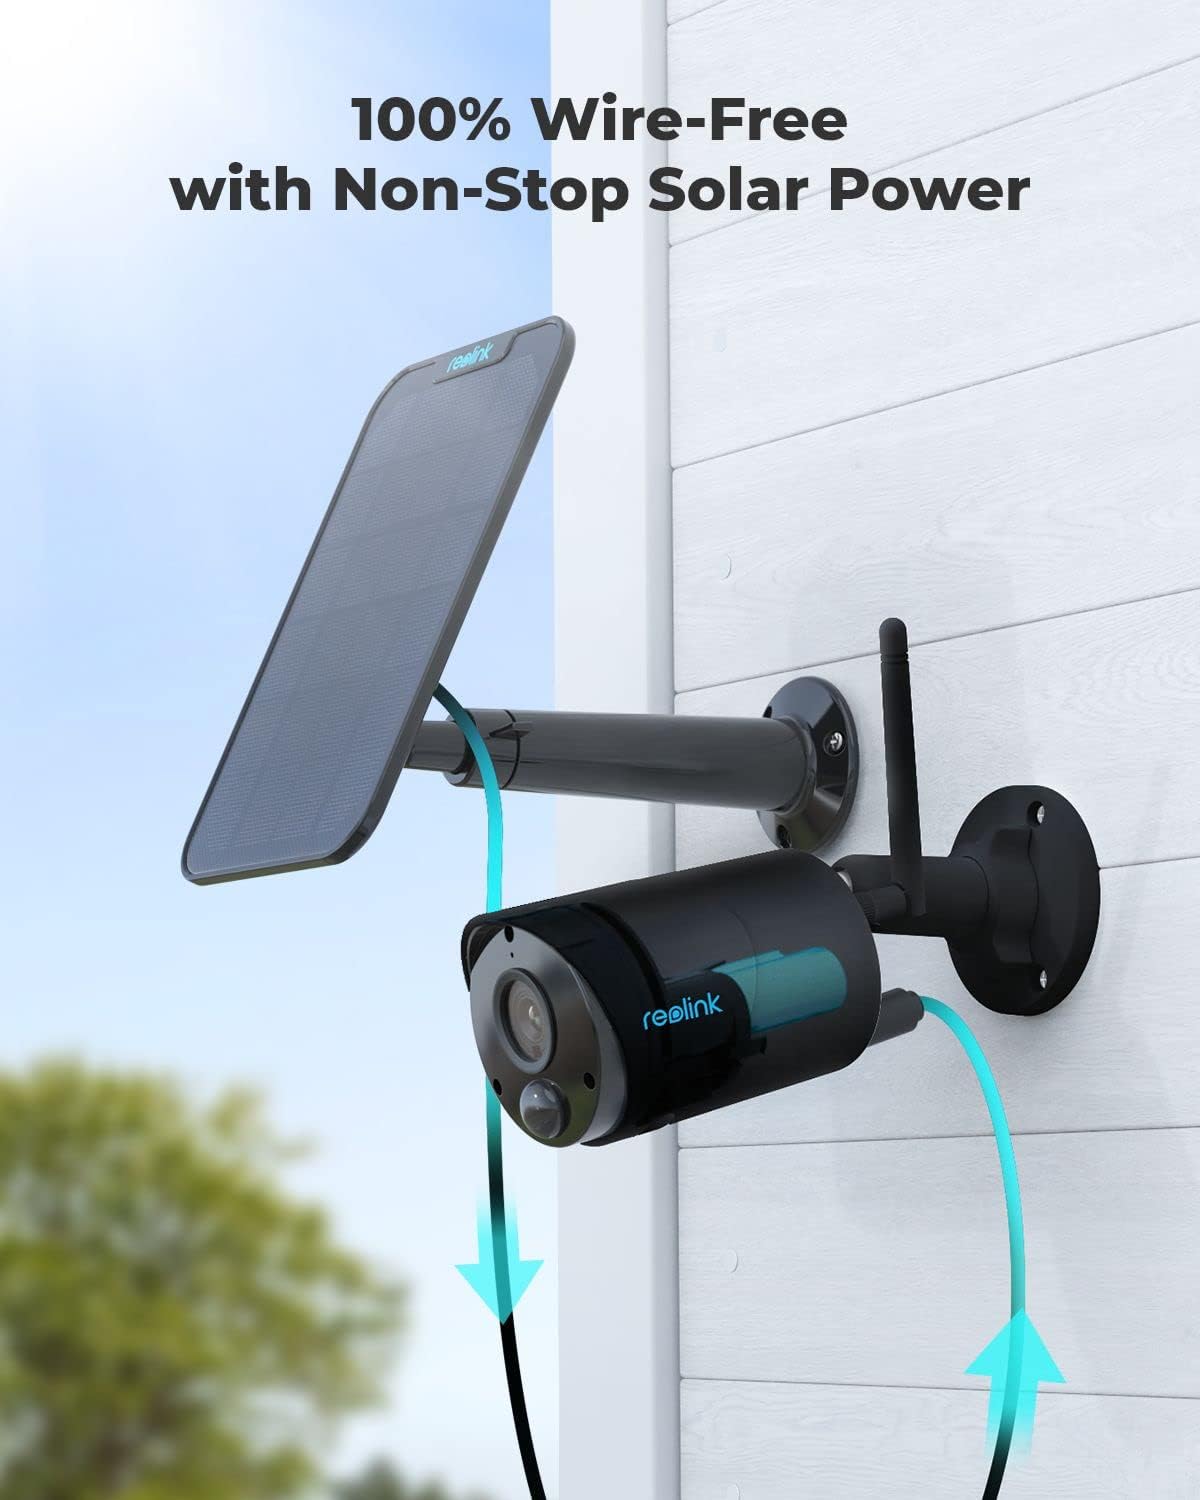 3MP Outdoor Solar Security Camera with Smart Detection, Battery Power, 2-Way Audio, SD Card/Cloud Storage, Alexa Compatibility - Argus Eco-Black+Solar Panel